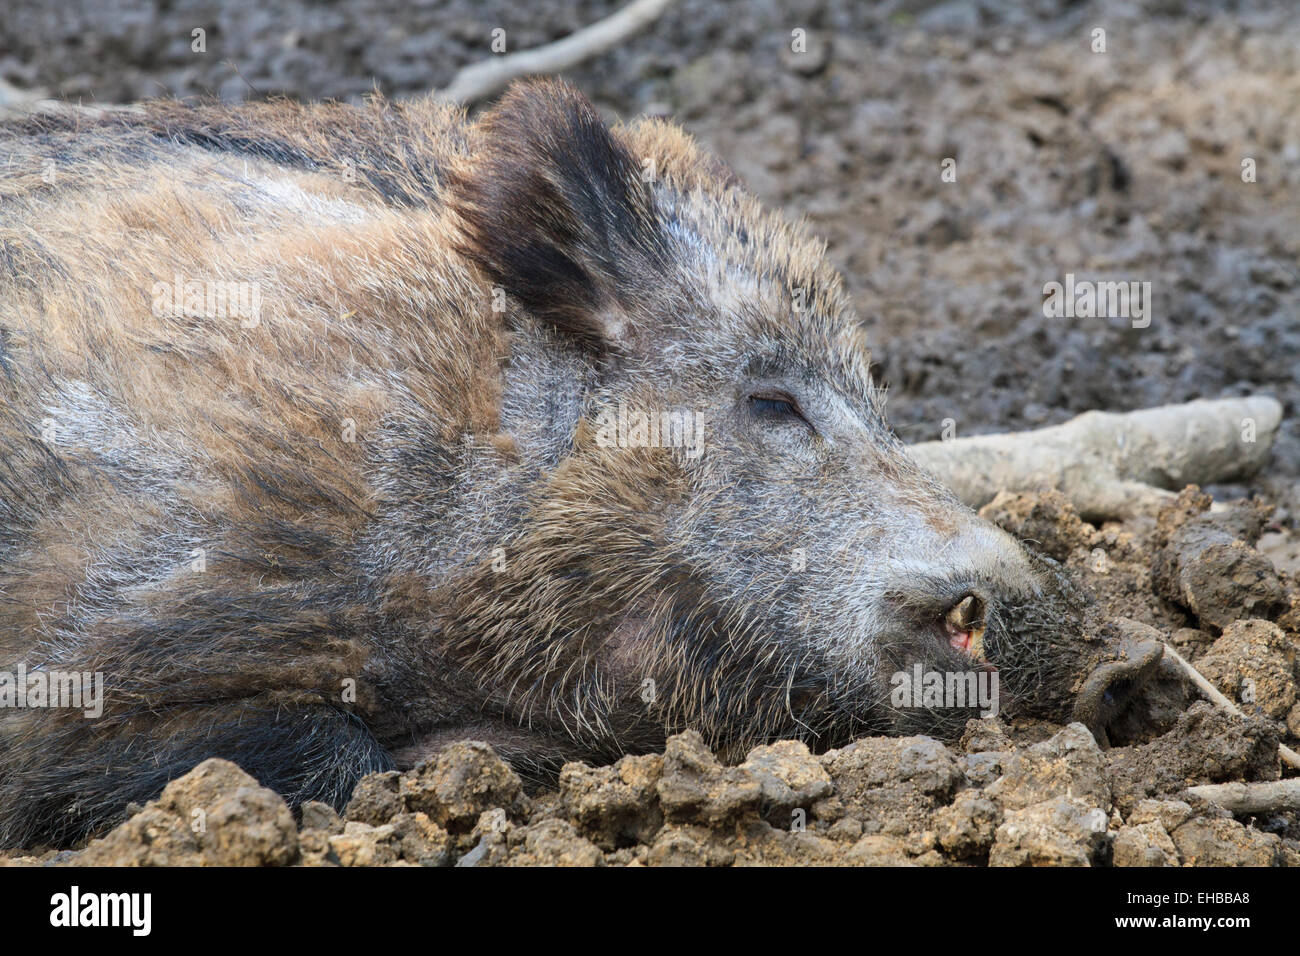 Boar resting in the mud close Stock Photo